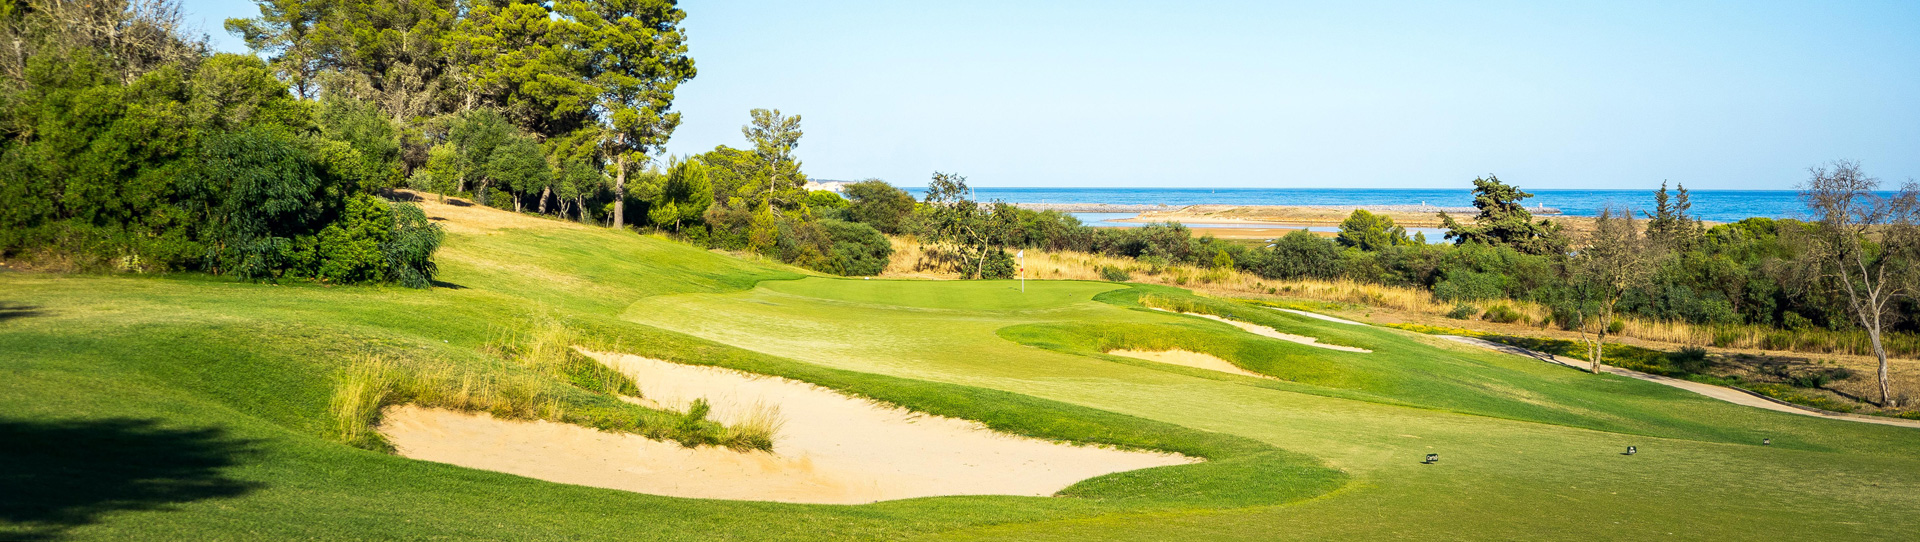 Portugal golf holidays - Palmares Quintuplet Experience - Photo 1